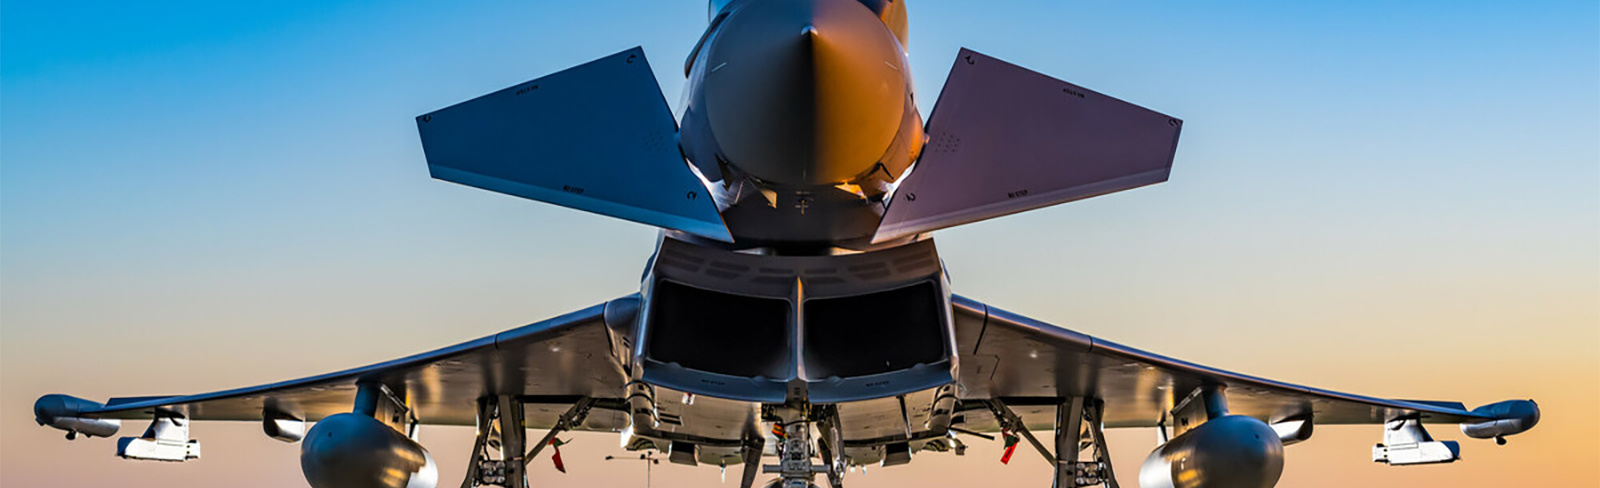 BAE Systems awarded £80 million in Typhoon avionics support contracts